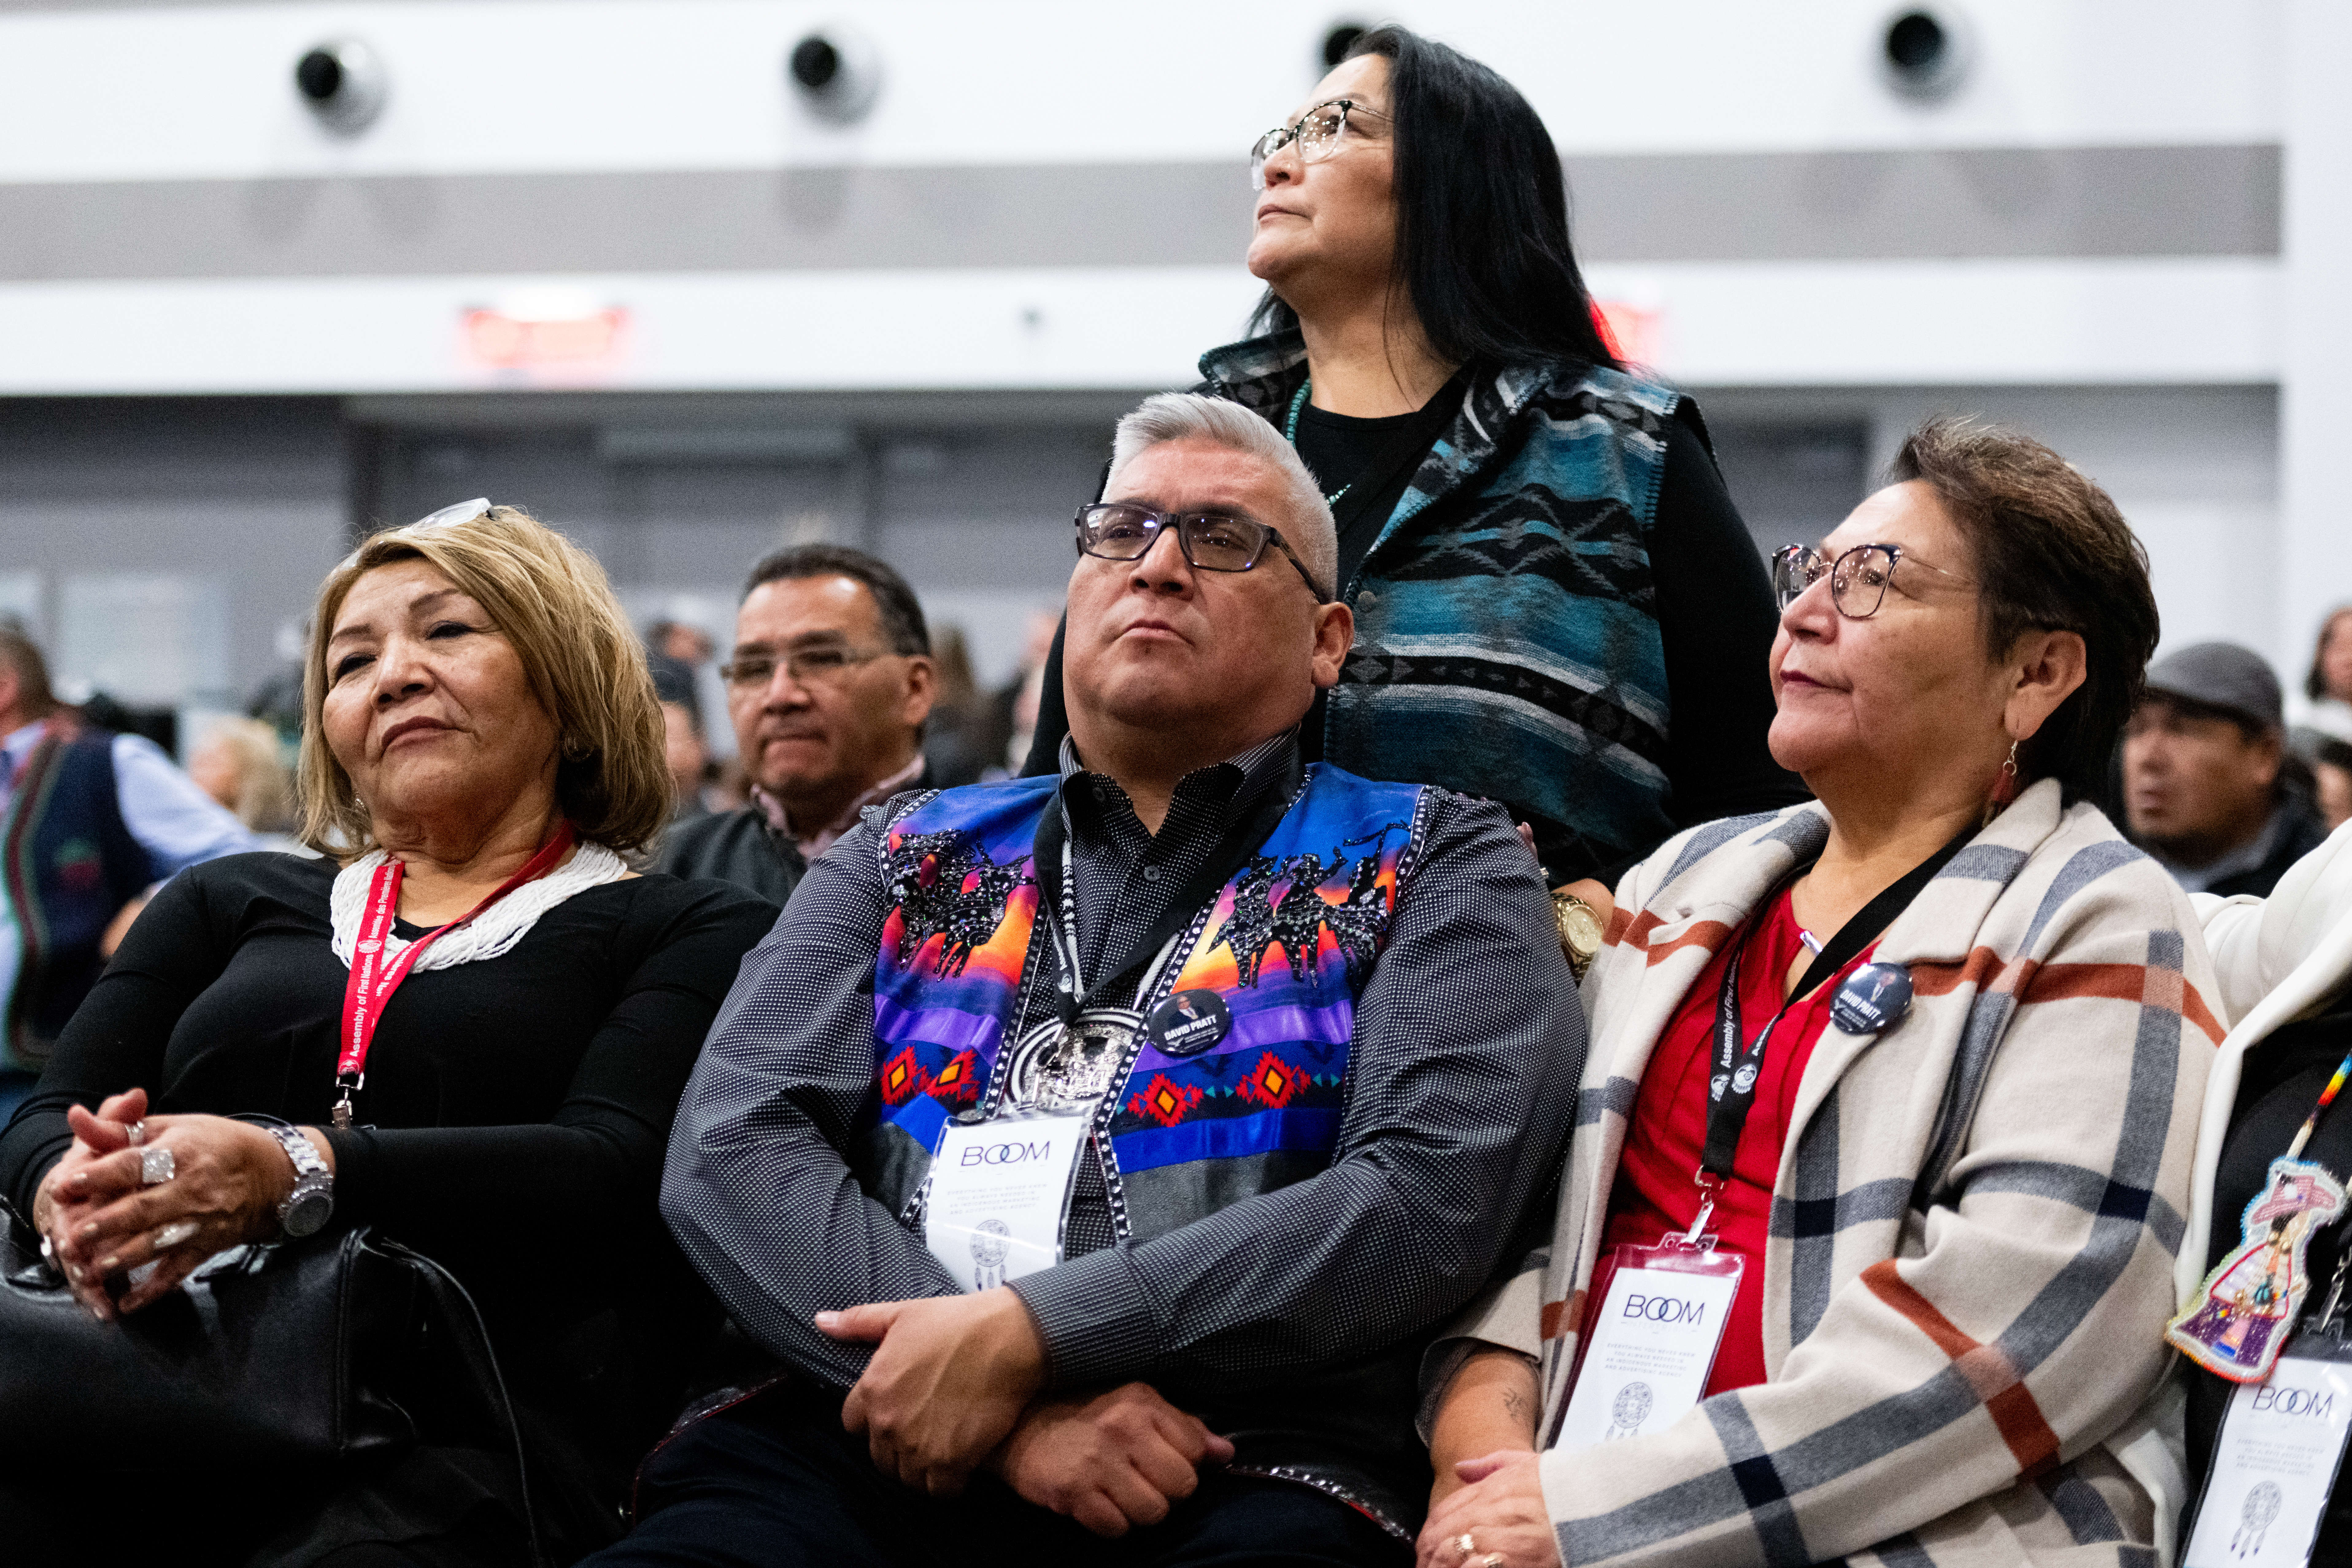 AFN election: No new national chief named after 6 rounds of voting